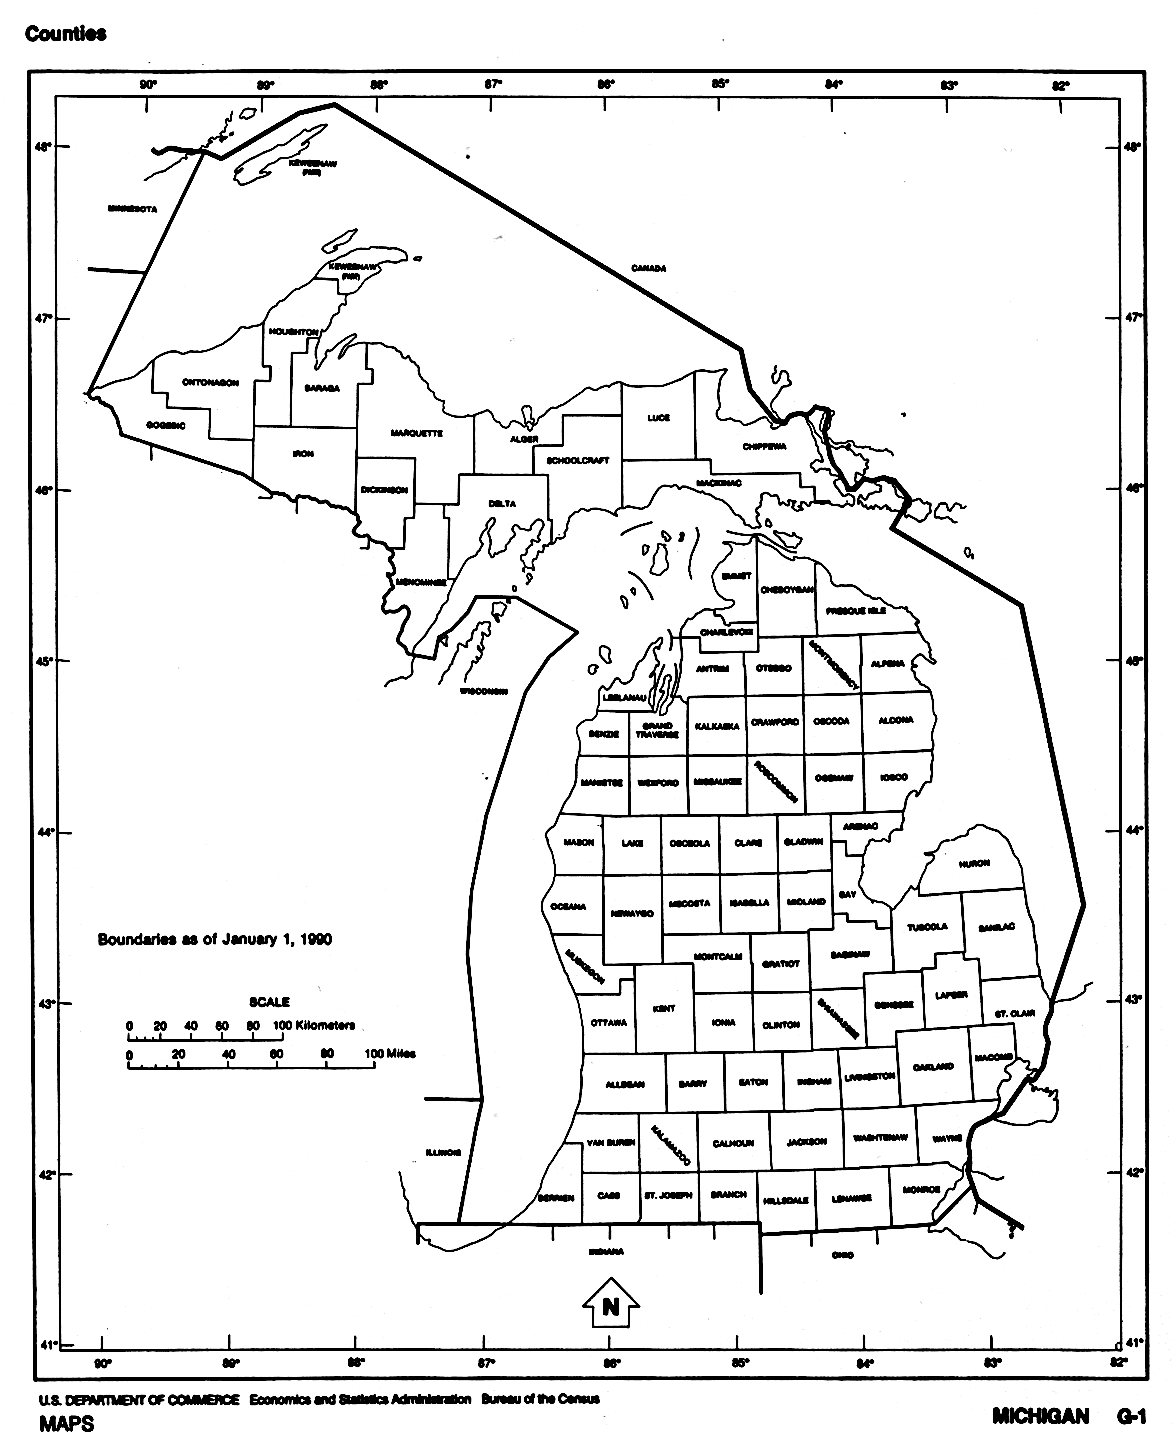 Michigan Counties map with outline and location of each county in MI